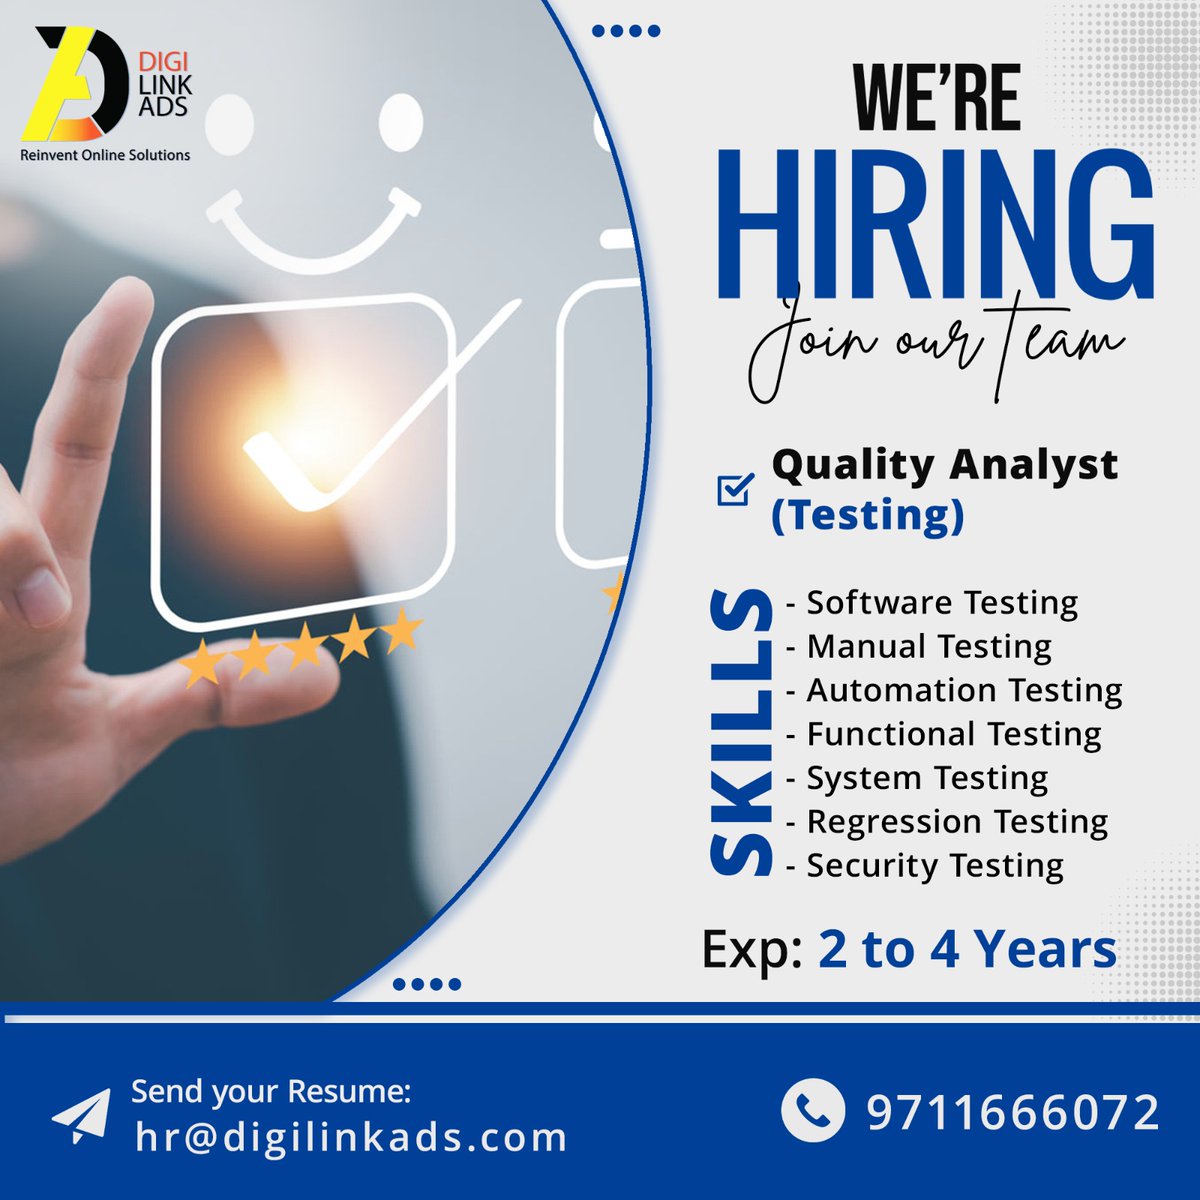 Join Our Team as a Q.A Engineer..

       !!!!!!!!!!! HIRING !!!!!!!!!!!!

#Qualityanalyst #SoftwareTesting #CodeReview #Bughunting #FunctionalTesting #PerformanceTesting #ManualTesting #RegressionTesting #TestDrivenDevelopment #UserAcceptanceTesting #DigilinkFamily #Corporate